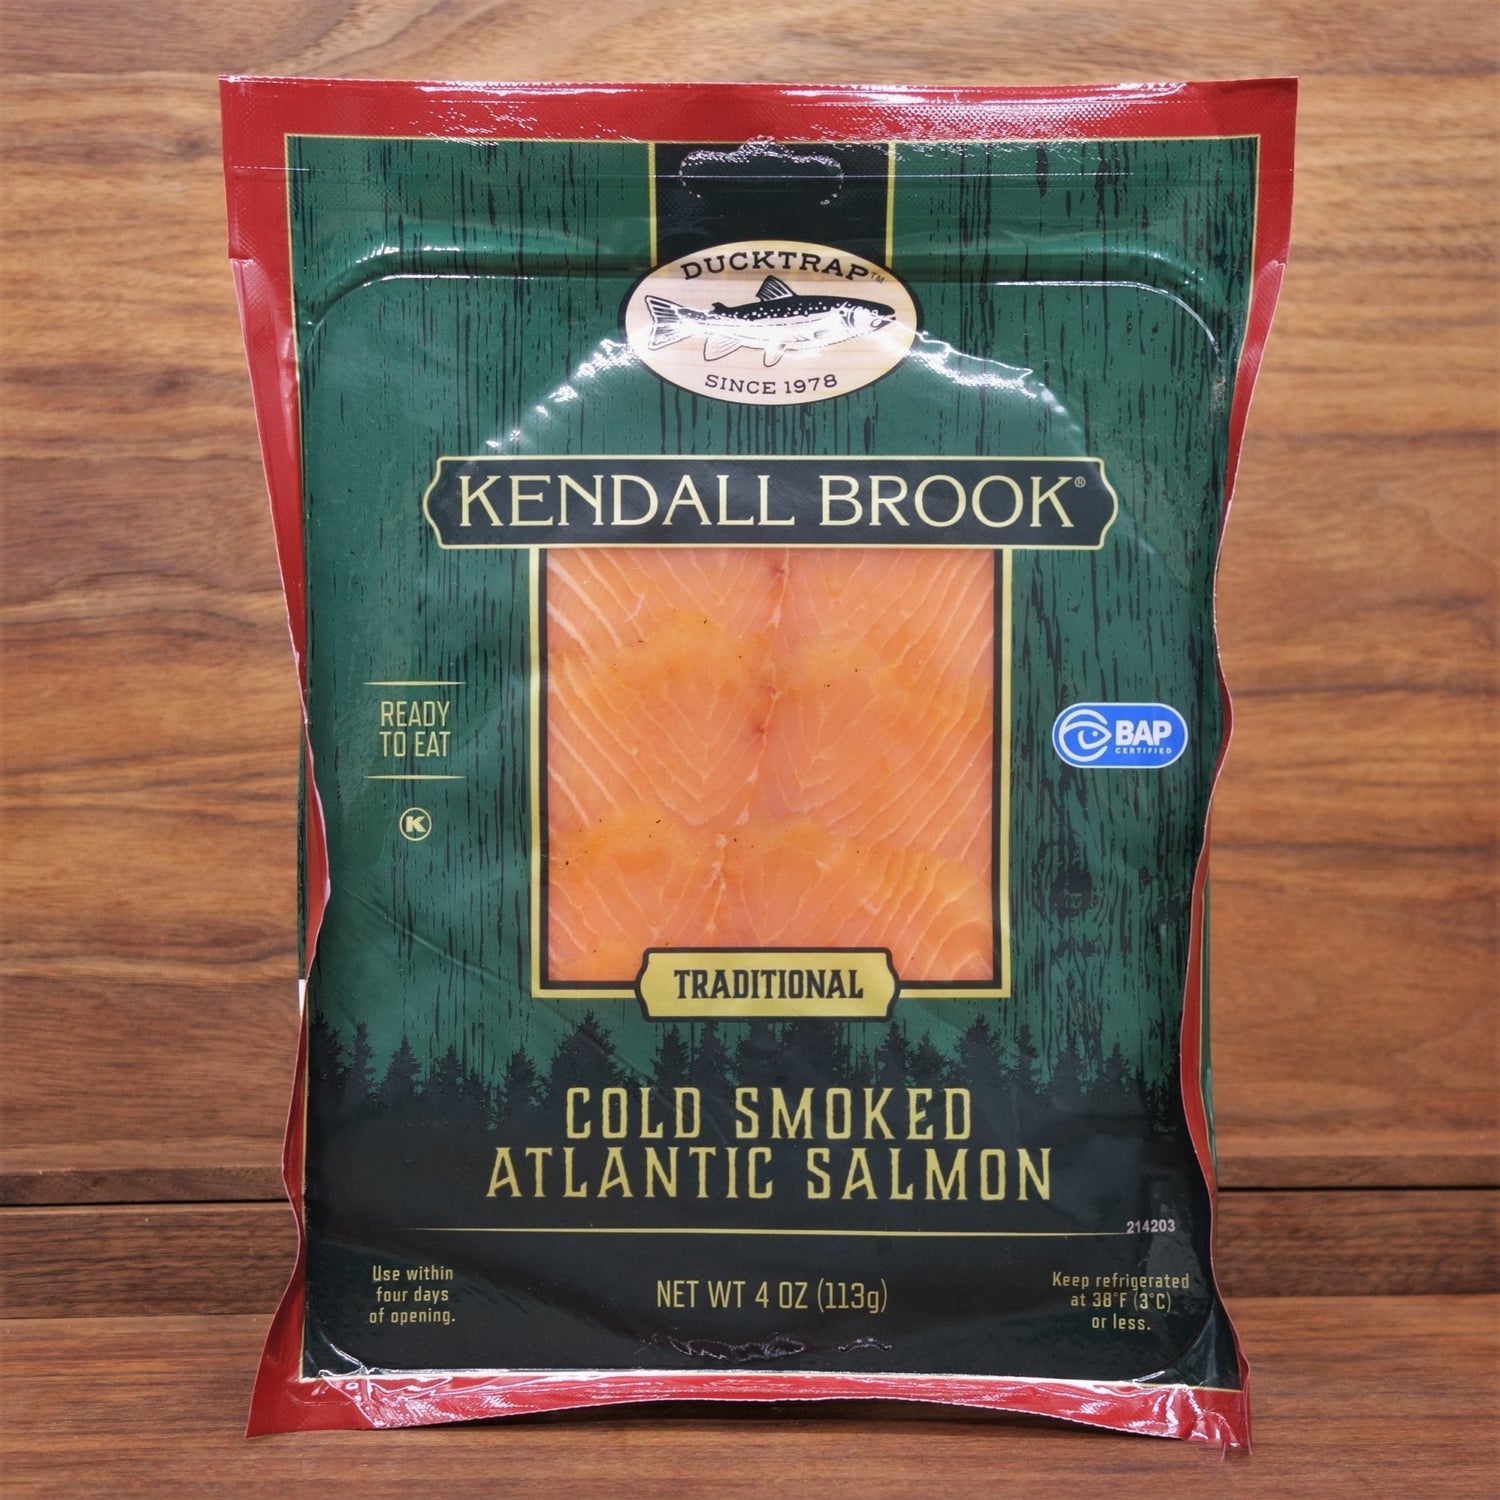 Ducktrap - Kendall Brook Smoked Salmon - Mongers' Provisions